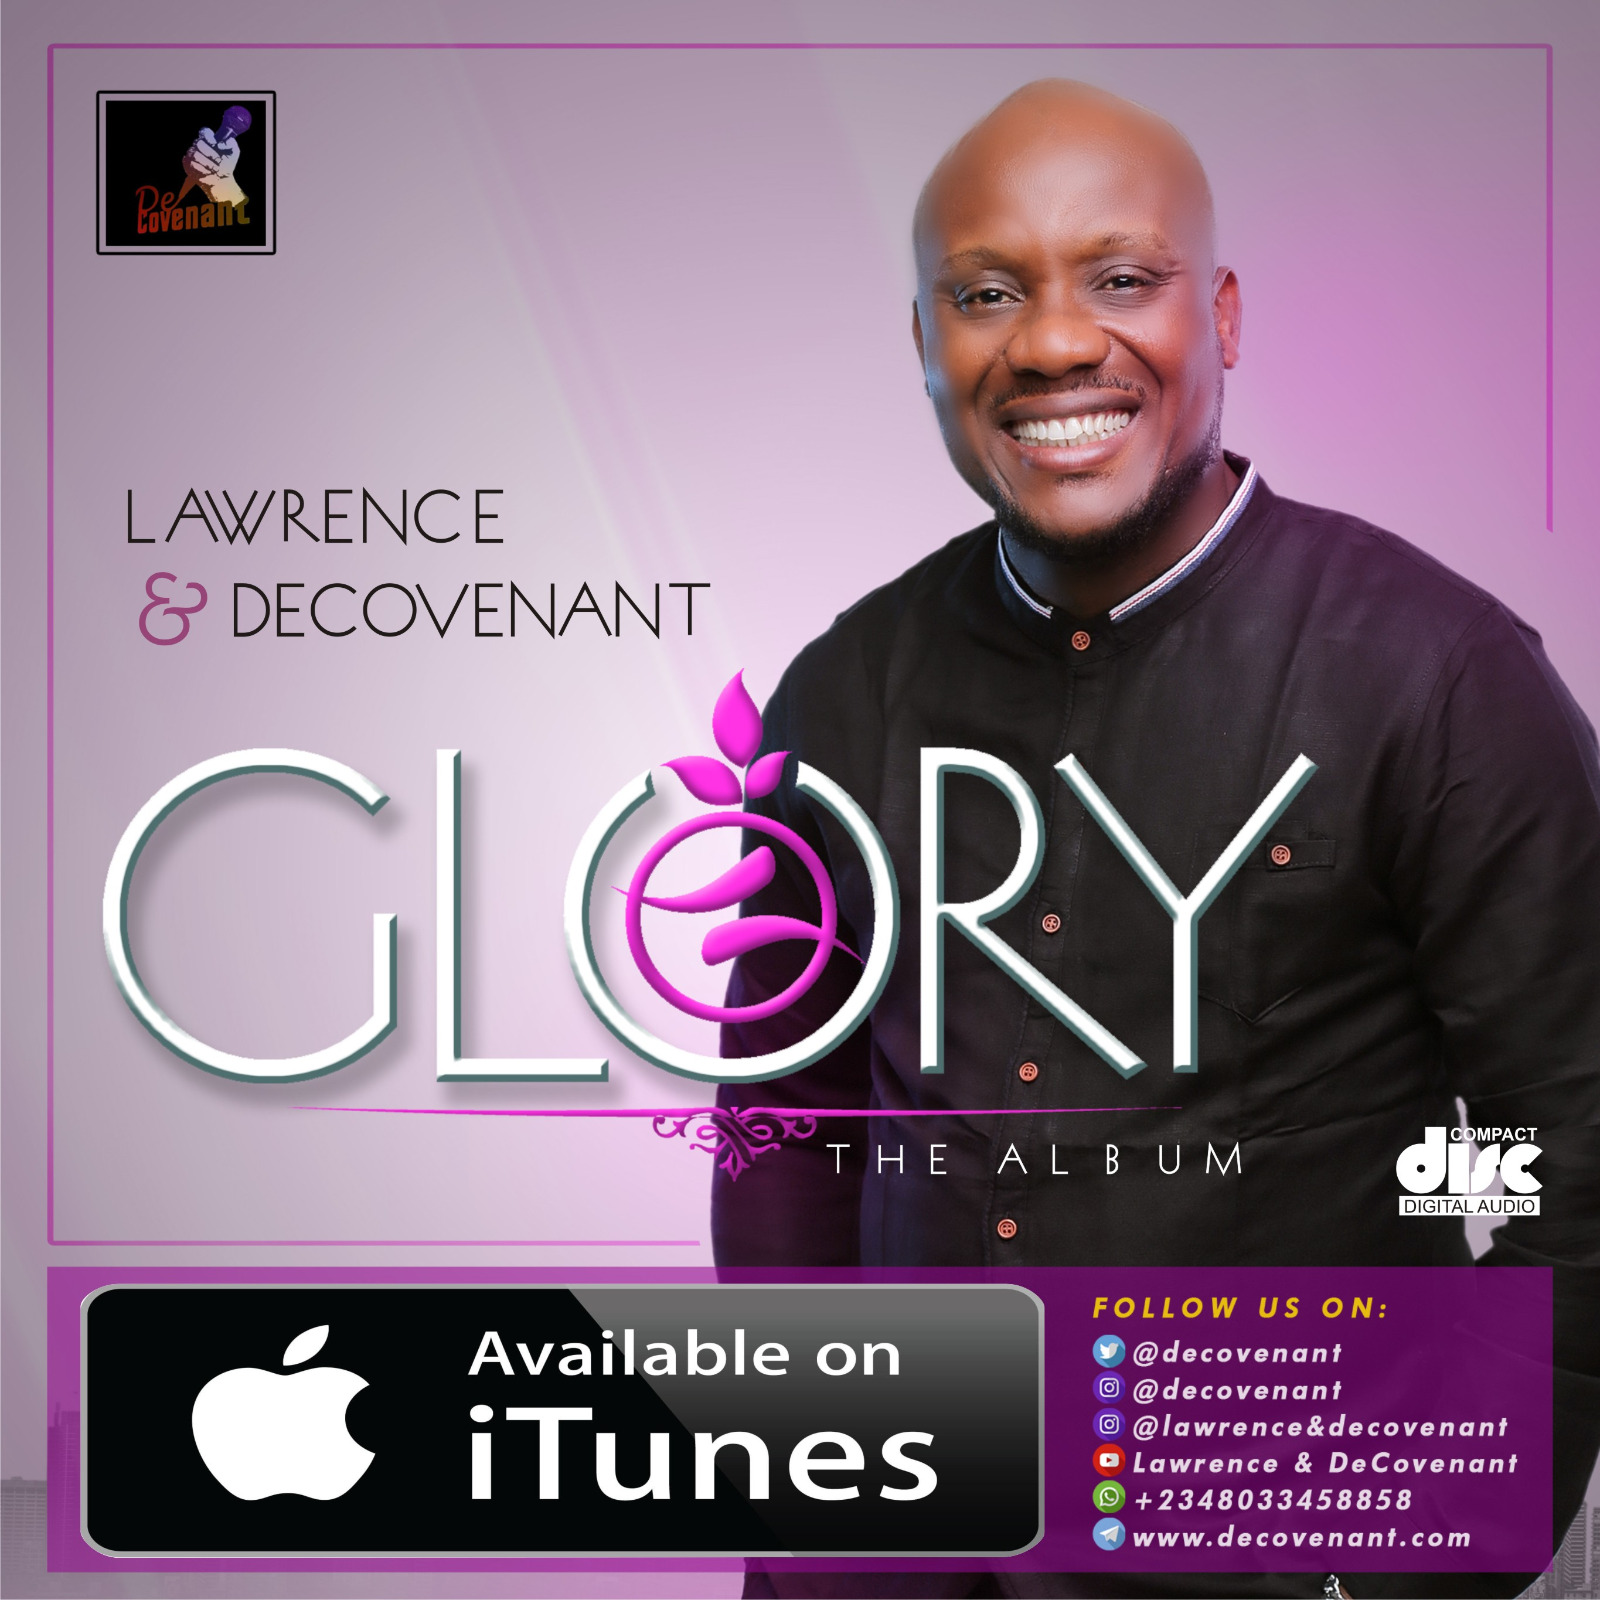 Lawrence & Decovenant Releases New Album “Glory”. Available Now!